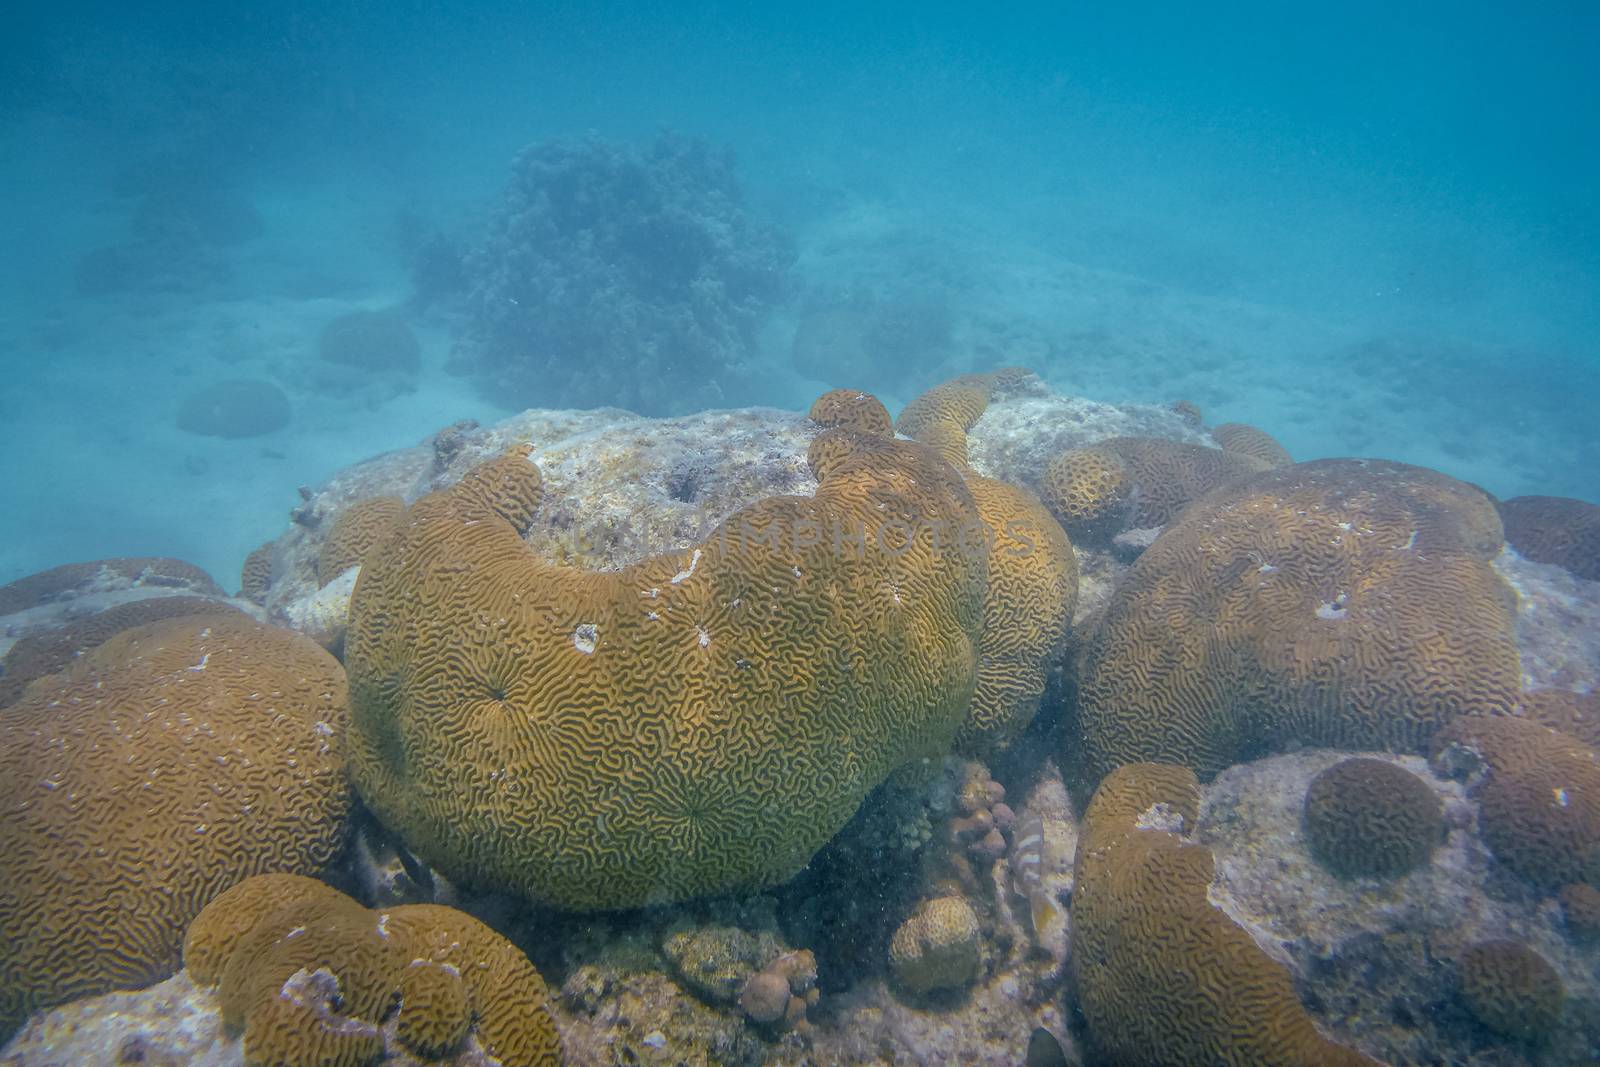 Ningaloo reef corals at marine life at Coral Bay Western Australia by MXW_Stock